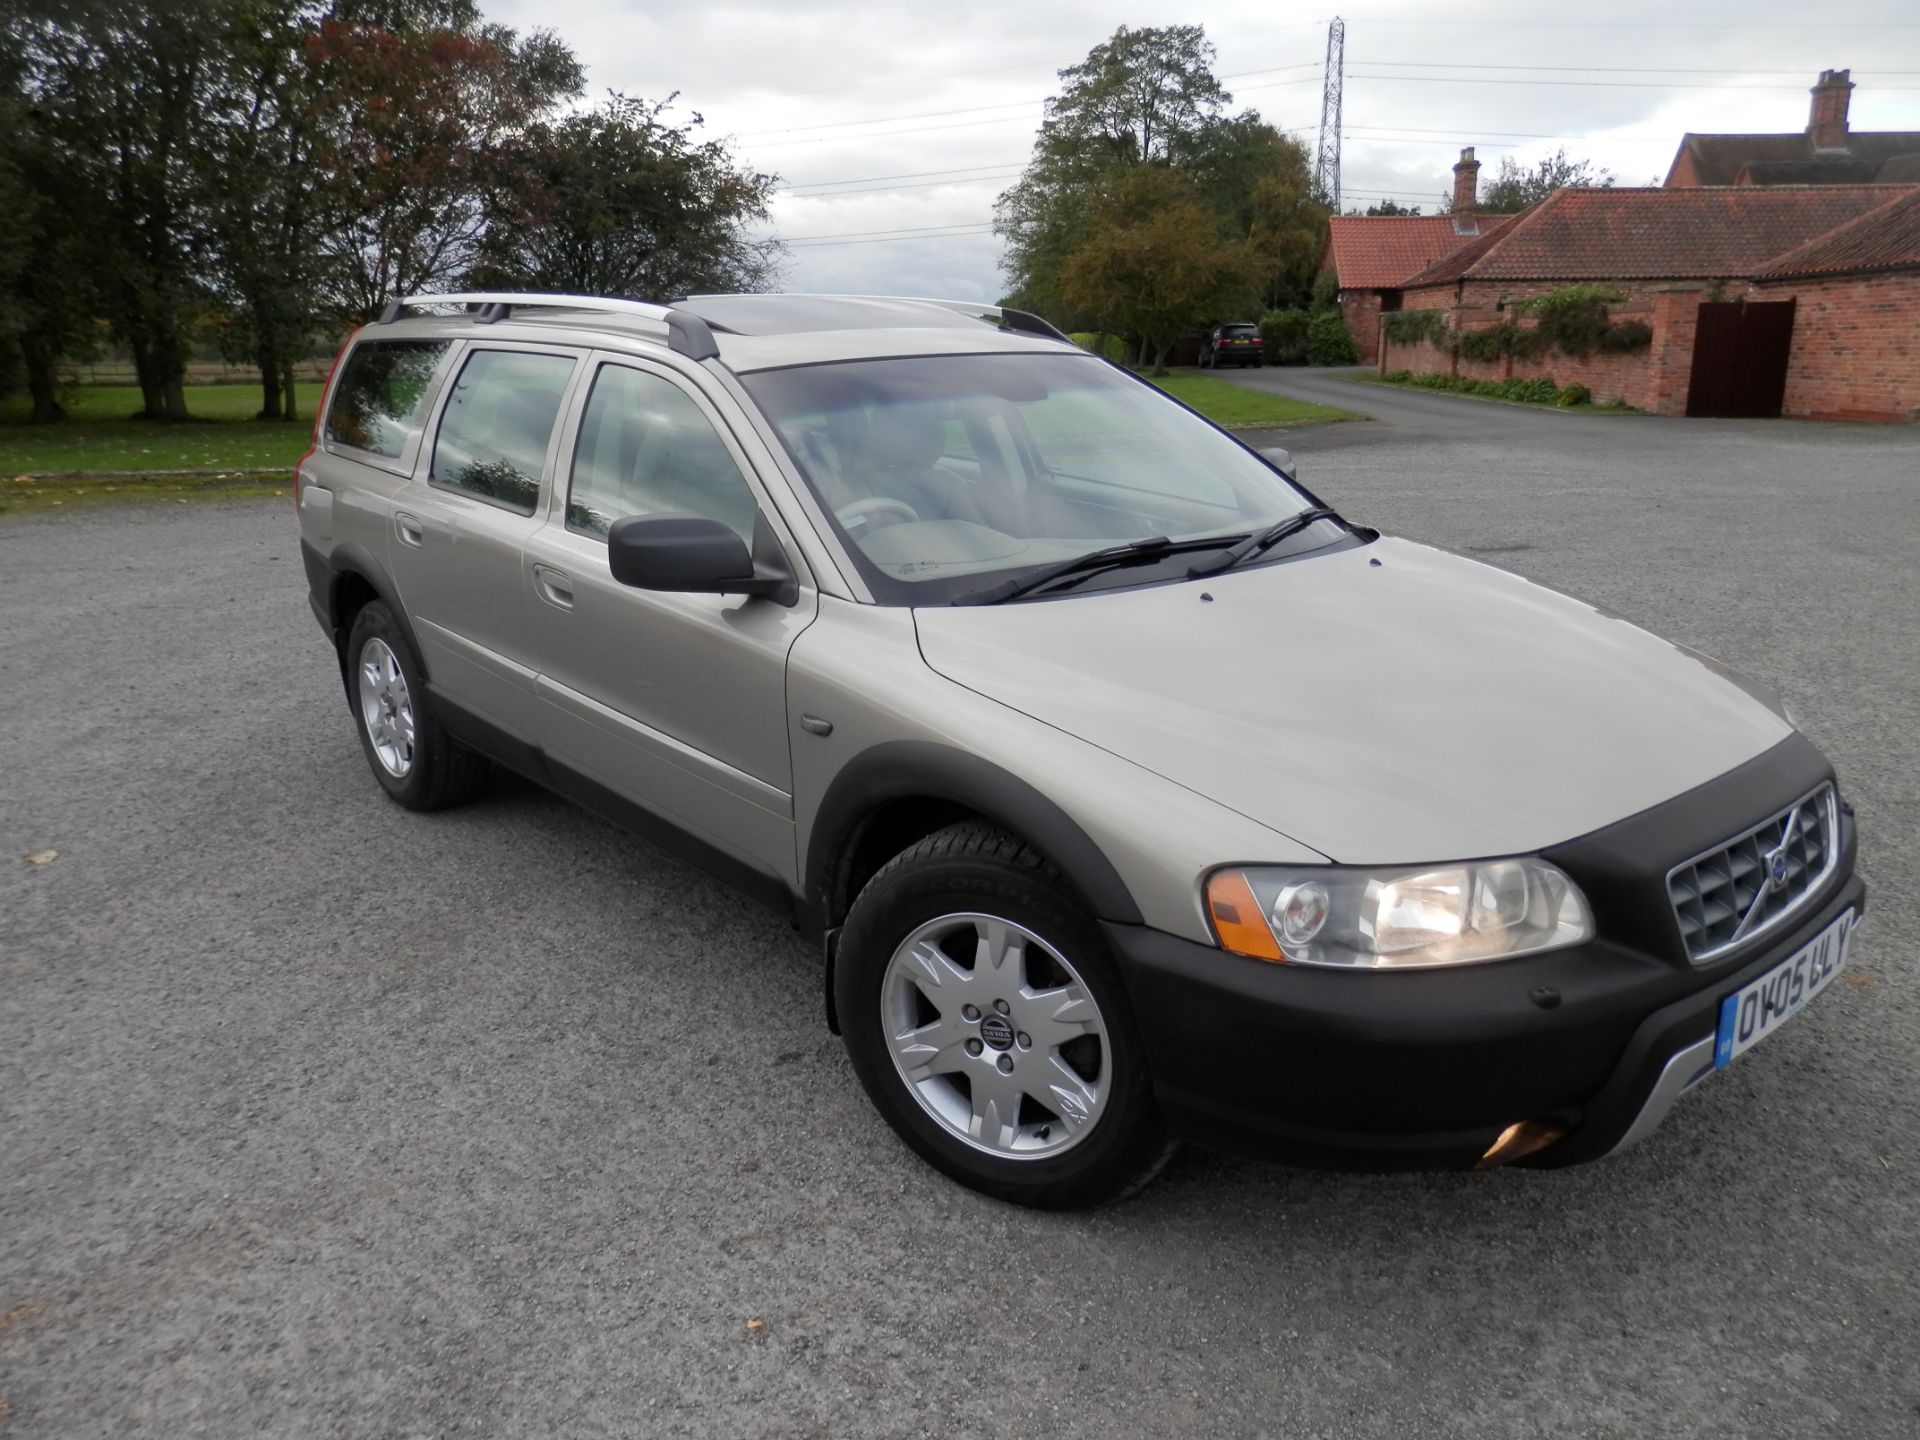 2005/05 VOLVO XC70 CROSS COUNTRY 2.4 D5 DIESEL AUTOMATIC, 4 WHEEL DRIVE, MOT MAY 2017, 150K MILES. - Image 24 of 26